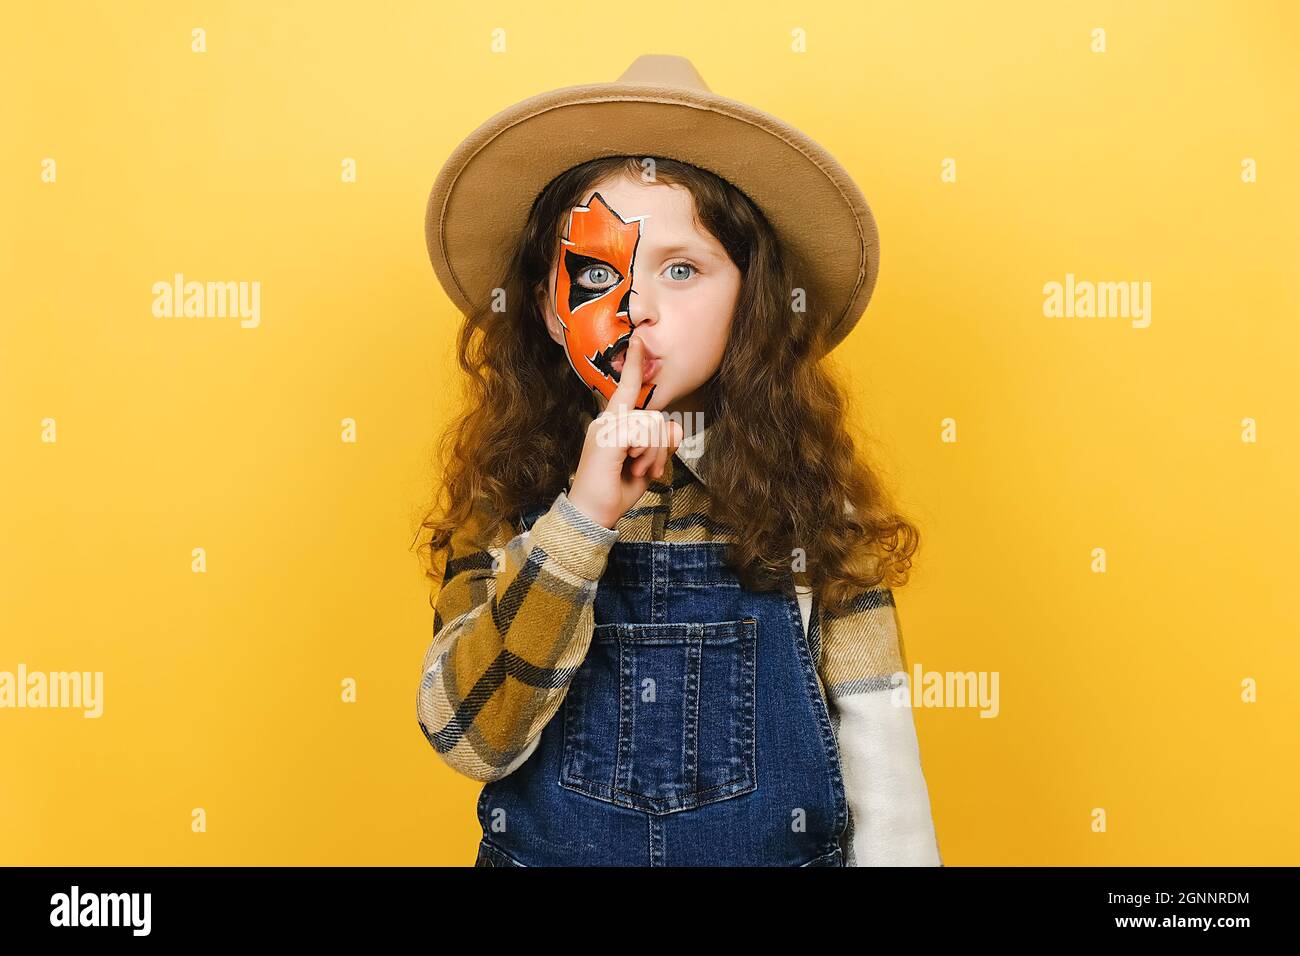 Secret charming fun curly little girl child with Halloween makeup mask wears brown hat, say hush be quiet with finger on lips shhh gesture Stock Photo